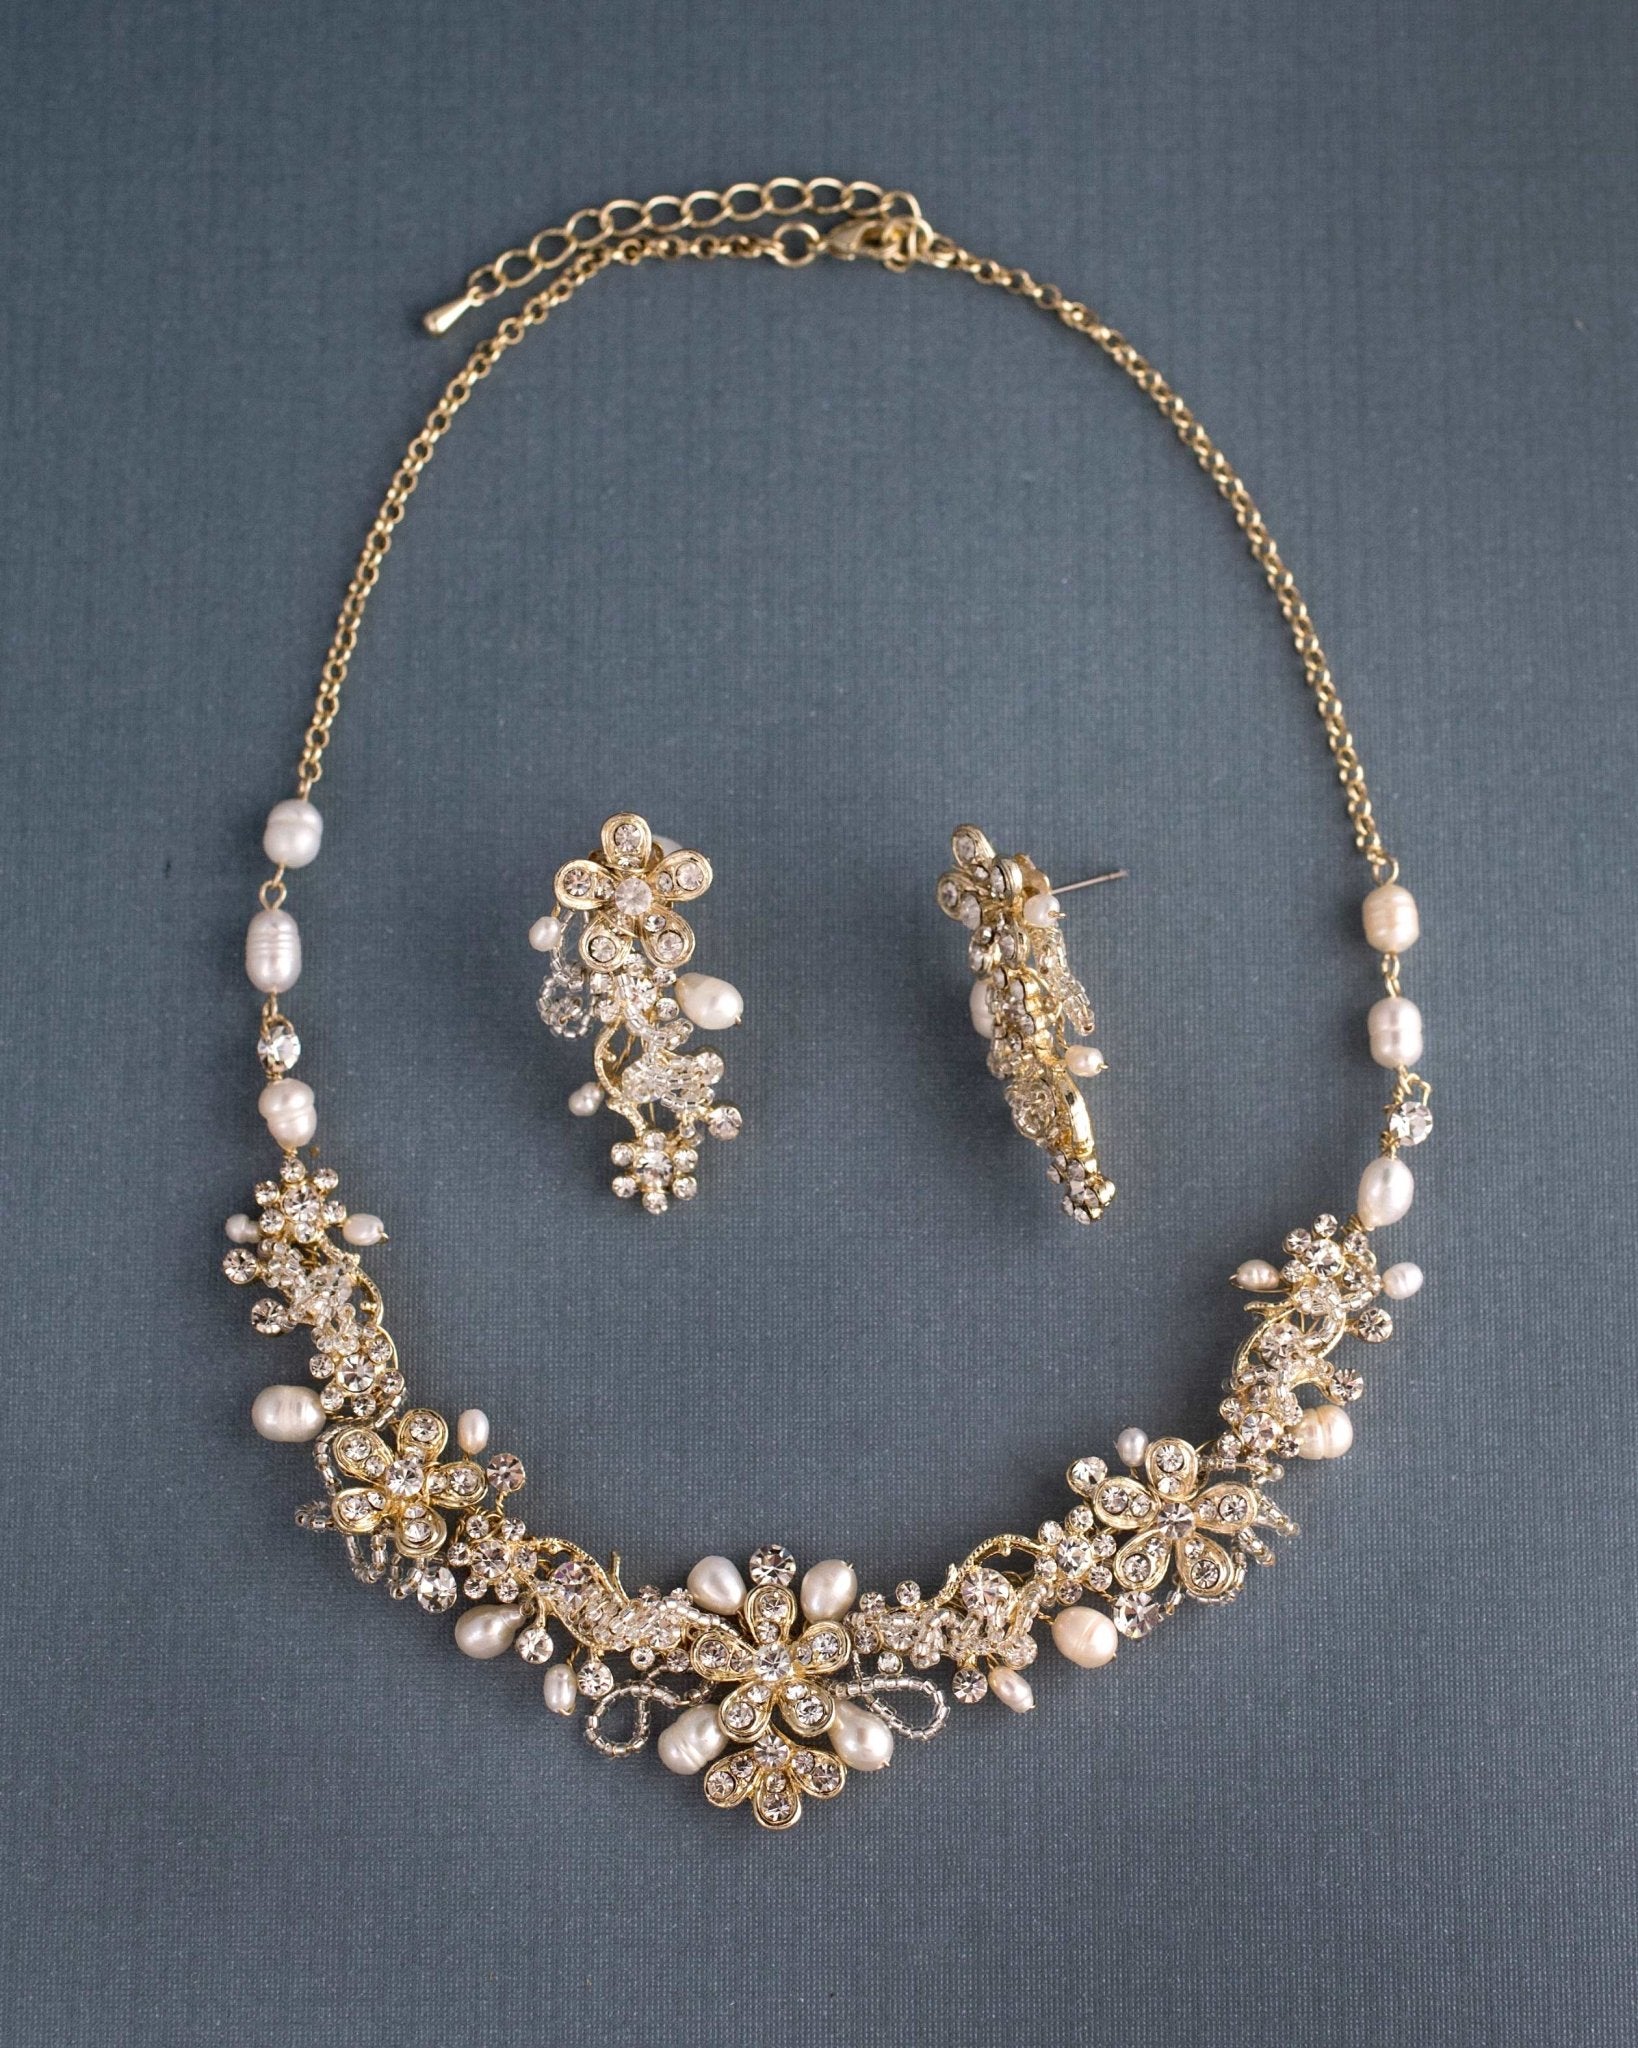 Bridal Necklace Set with Pearls in Gold - Cassandra Lynne